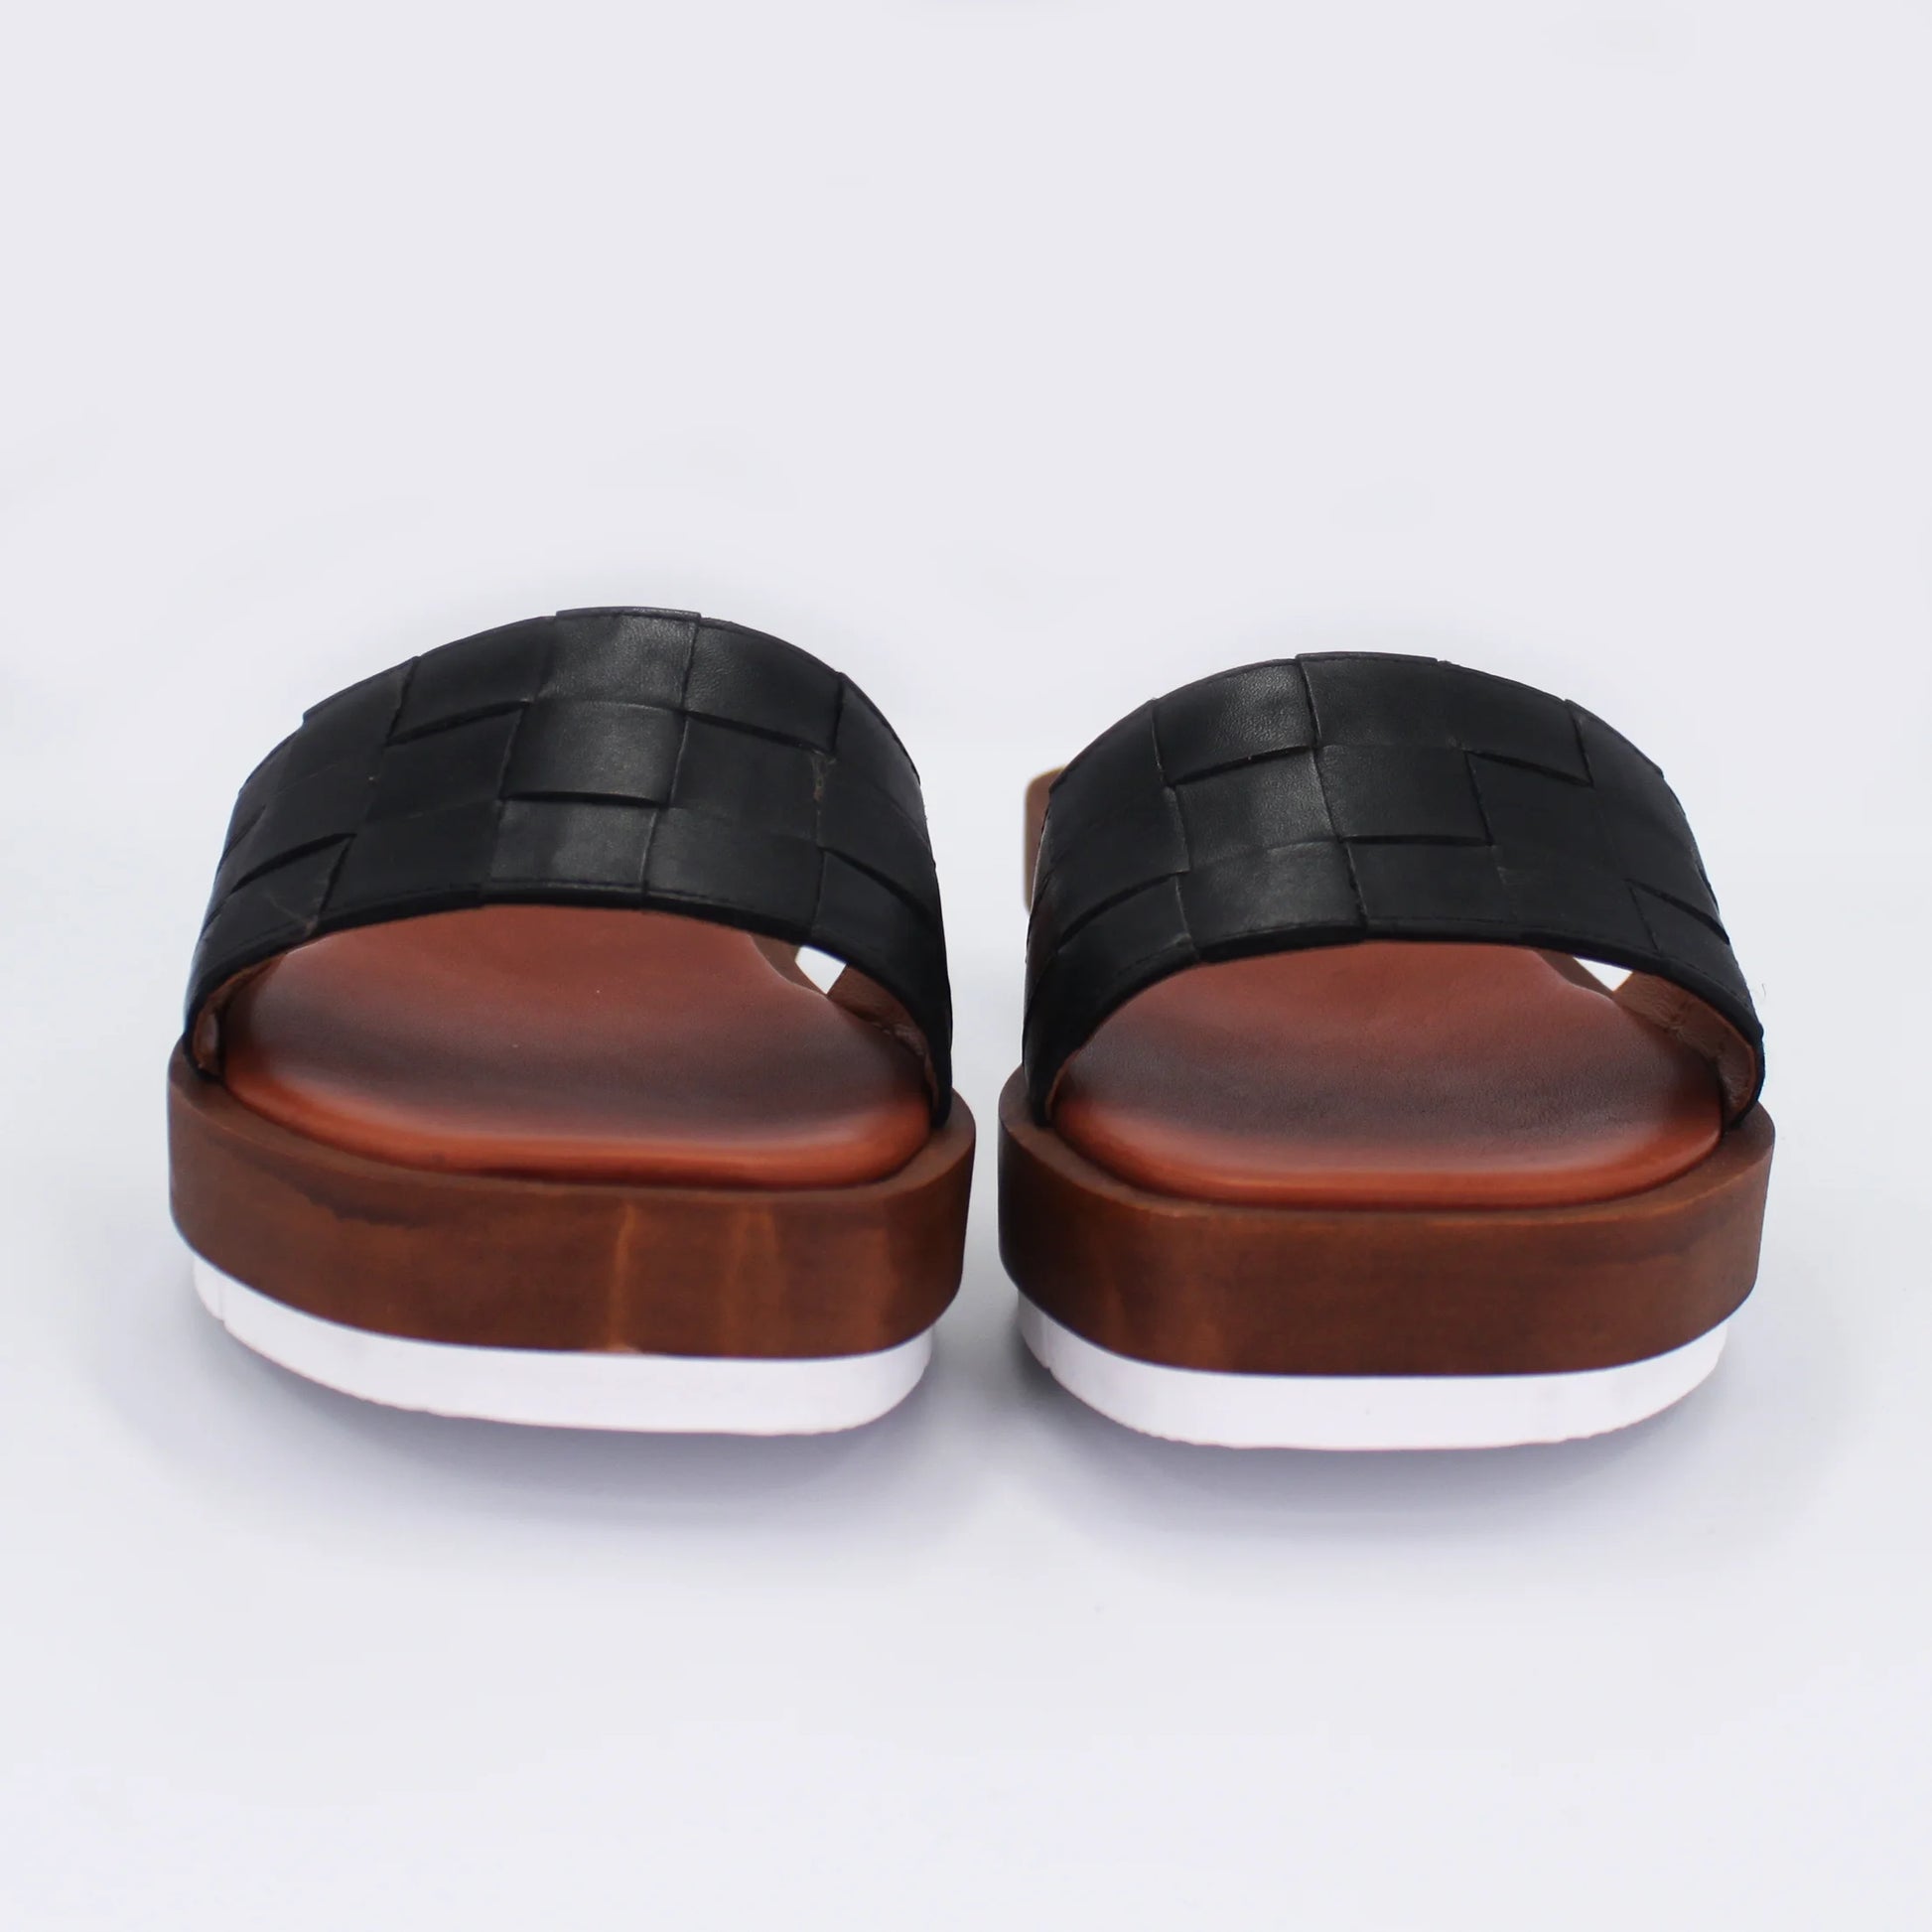 Shop Handmade Italian Leather Sandal in Nero Black (2150) or browse our range of hand-made Italian sandals for women in leather or suede in-store at Aliverti Durban or Cape Town, or shop online. We deliver in South Africa & offer multiple payment plans as well as accept multiple safe & secure payment methods.